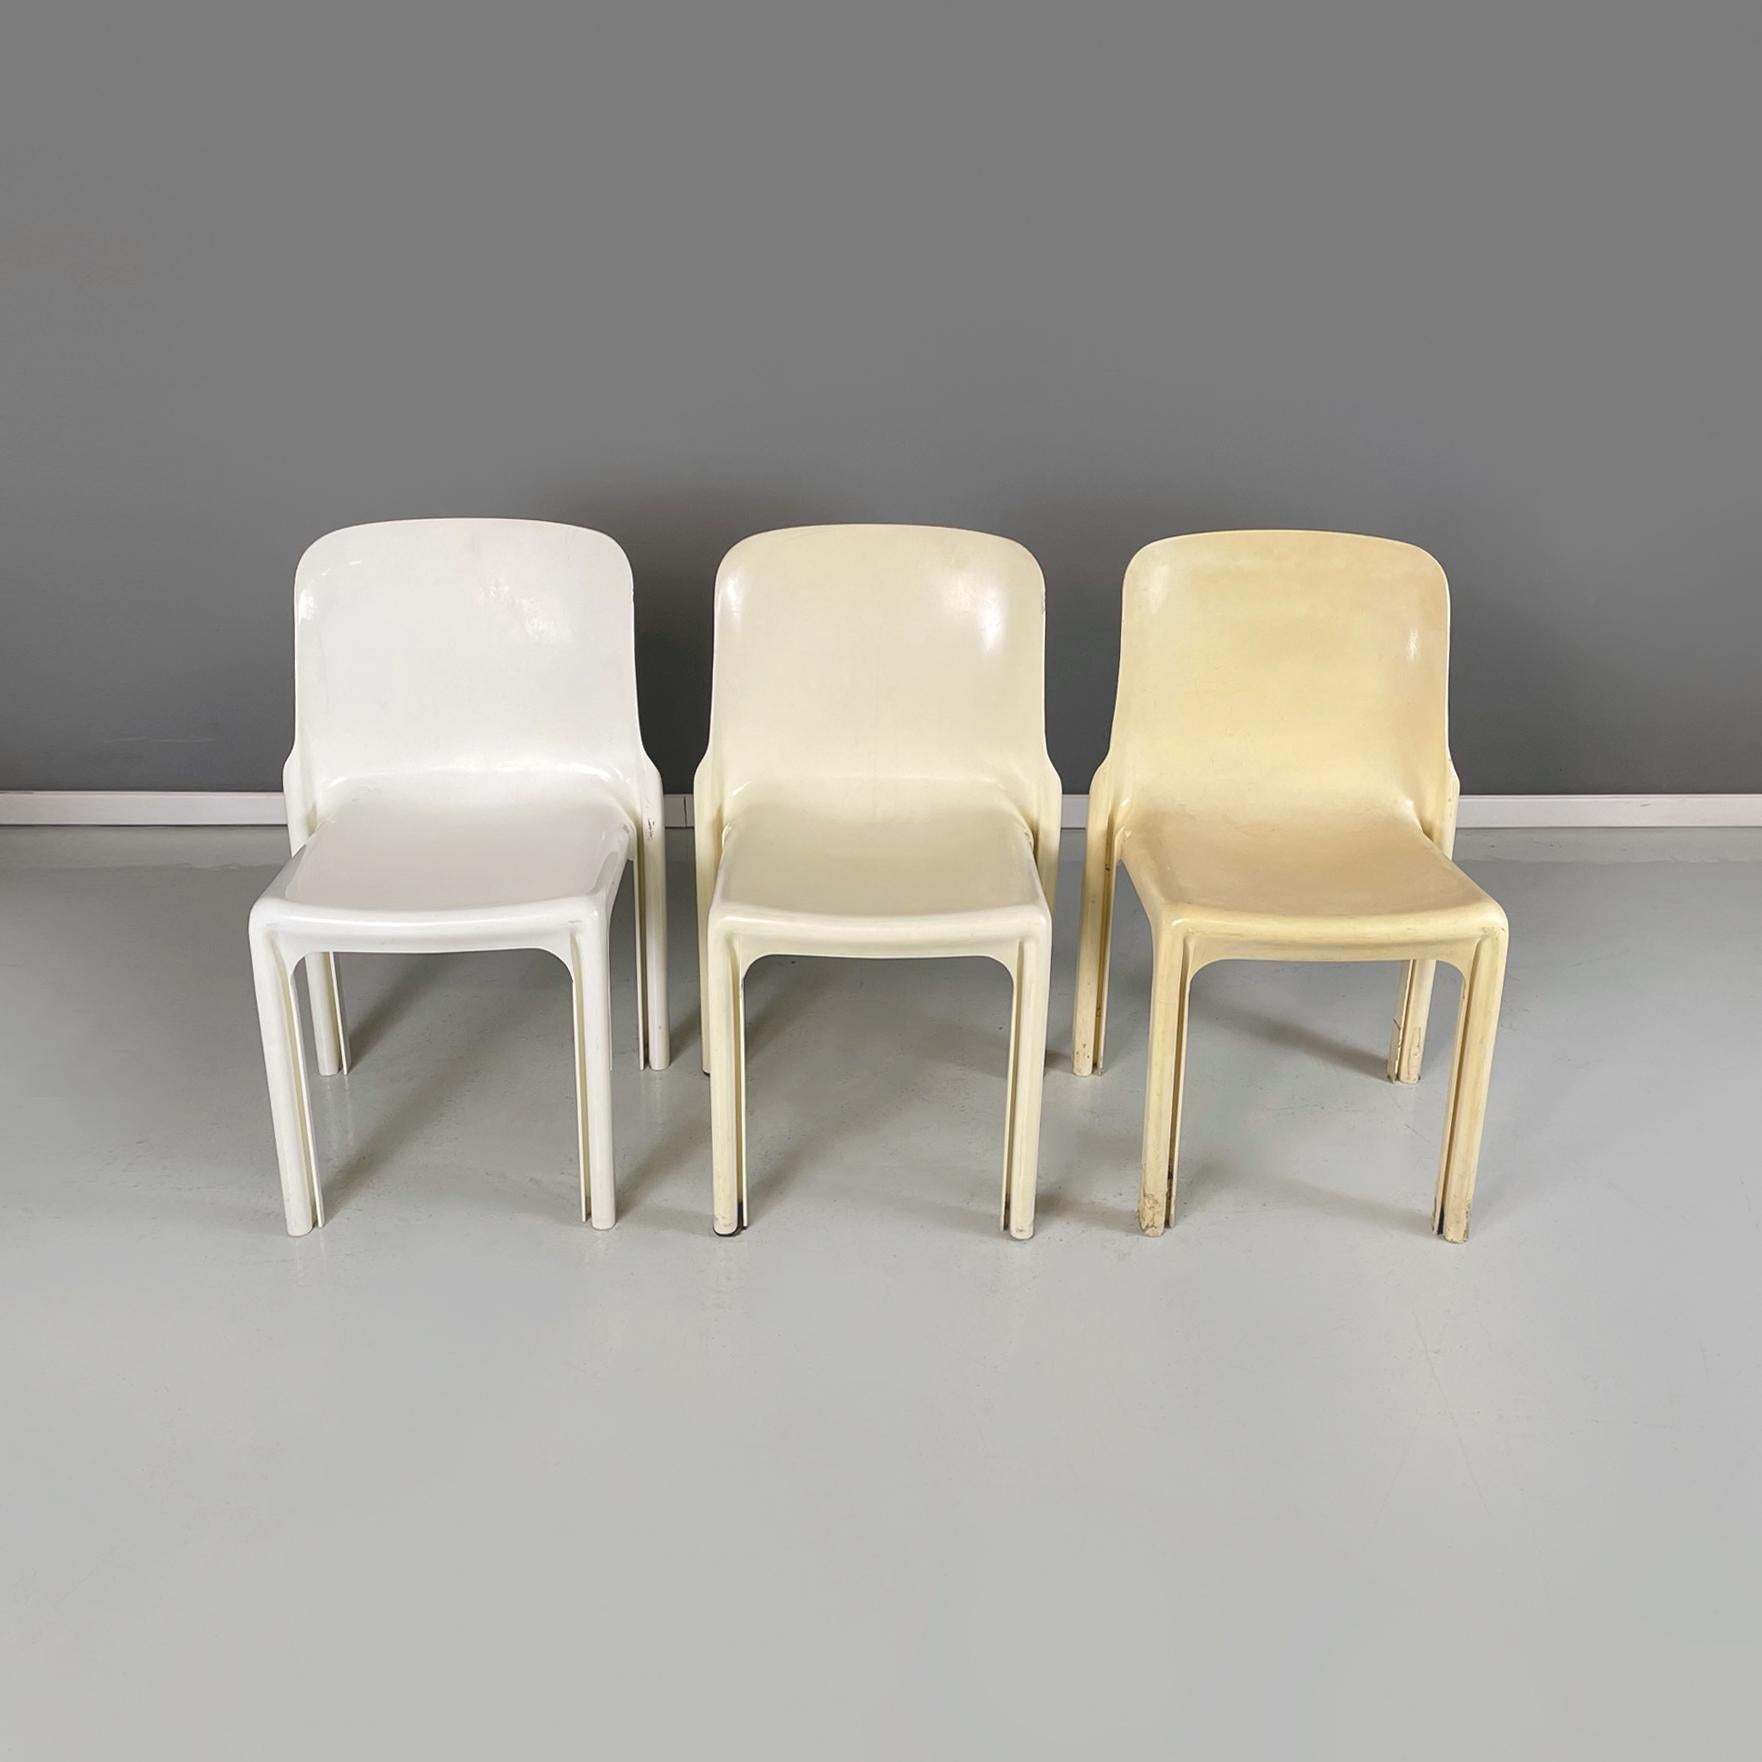 Italian Mid-Century Modern beige plastic Chairs mod. Selene by Vico Magistretti for Artemide, 1960s
Set of 4 chairs mod. Selene in white and beige plastic with square seat. The structure is monocoque, with S-shaped grooves along the legs.